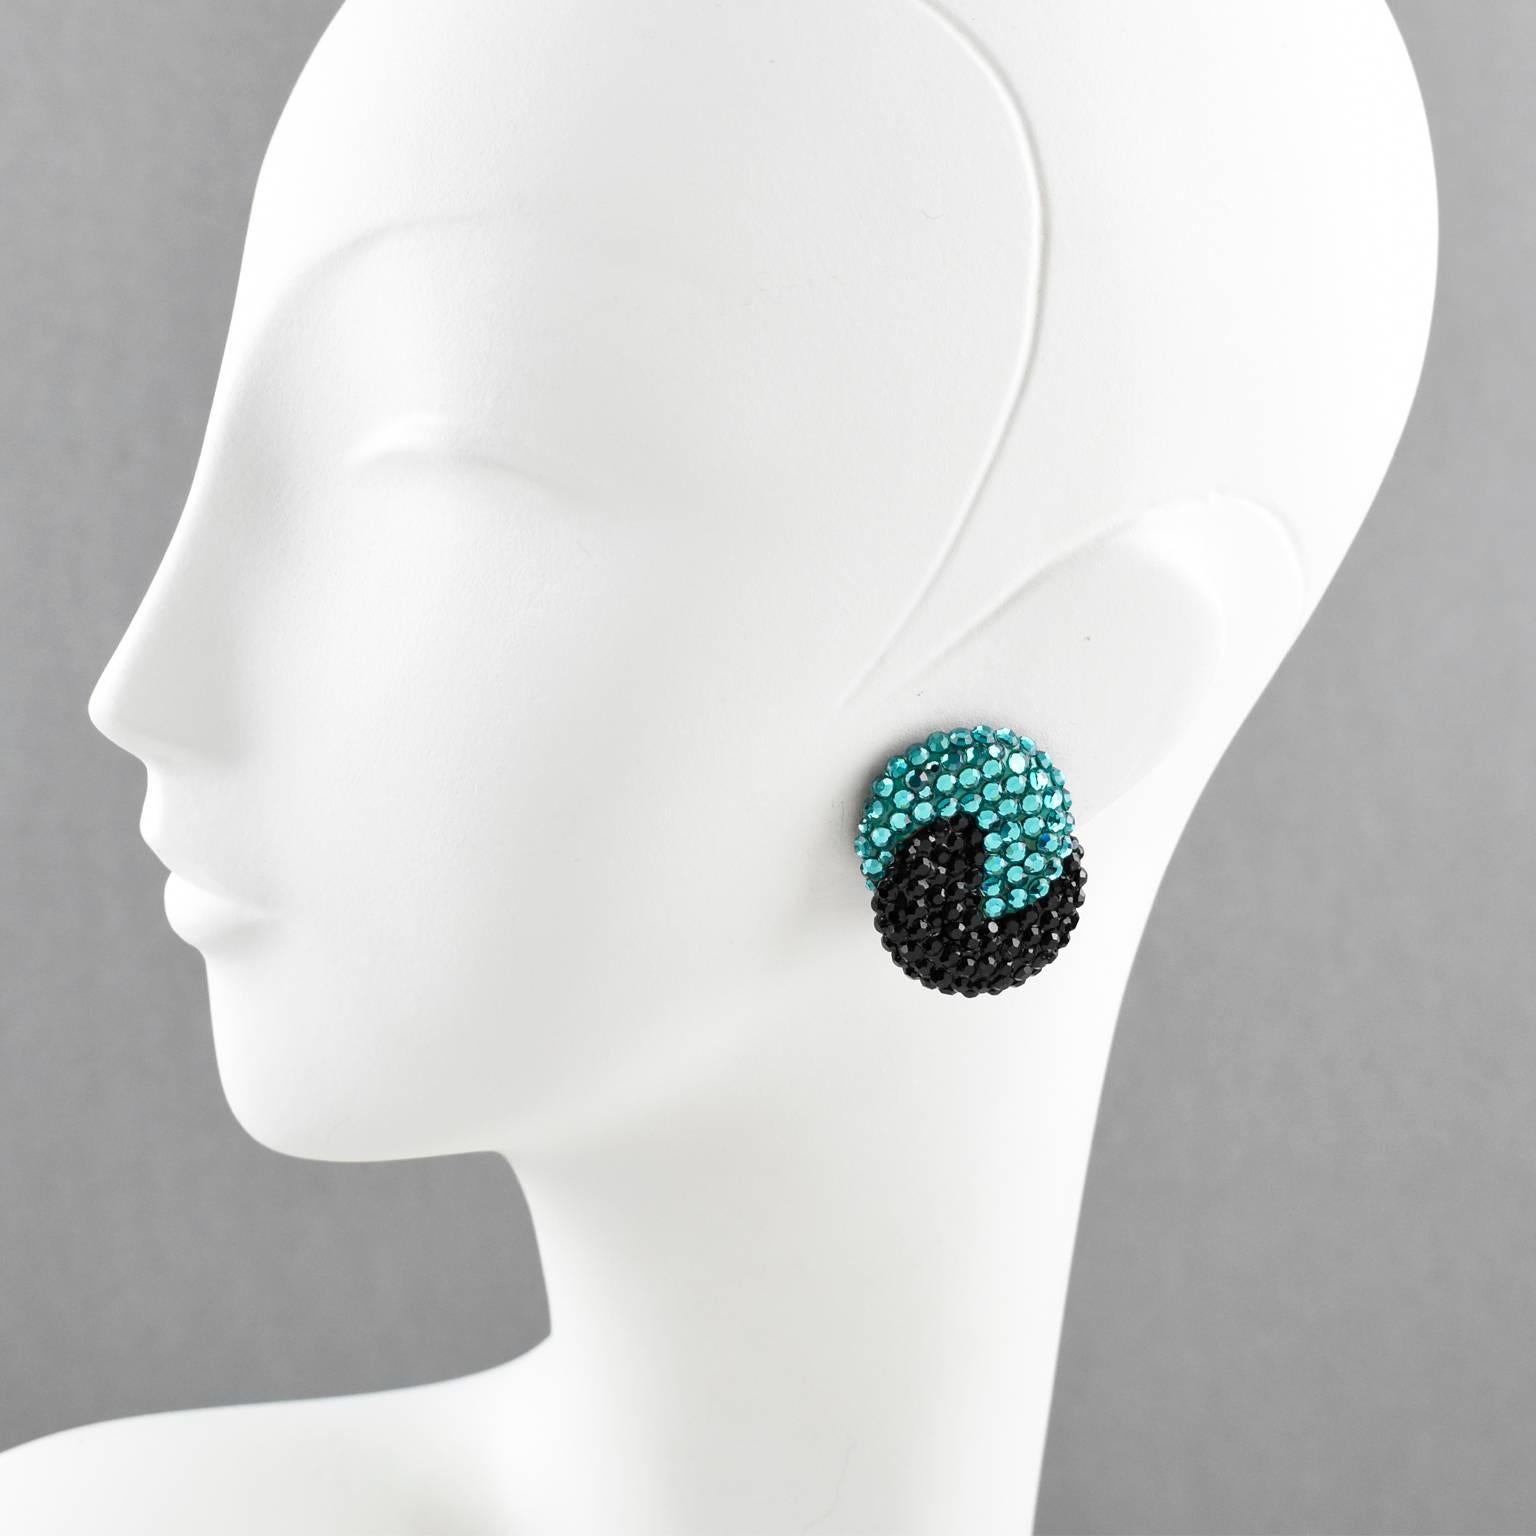 Elegant statement clip-on earrings designed by Richard Kerr in the 1980s. They are made up of his signature pave rhinestones. Featuring Yin and Yang swirl shape all covered with colorful crystal rhinestones on black resin background frame. Vivid